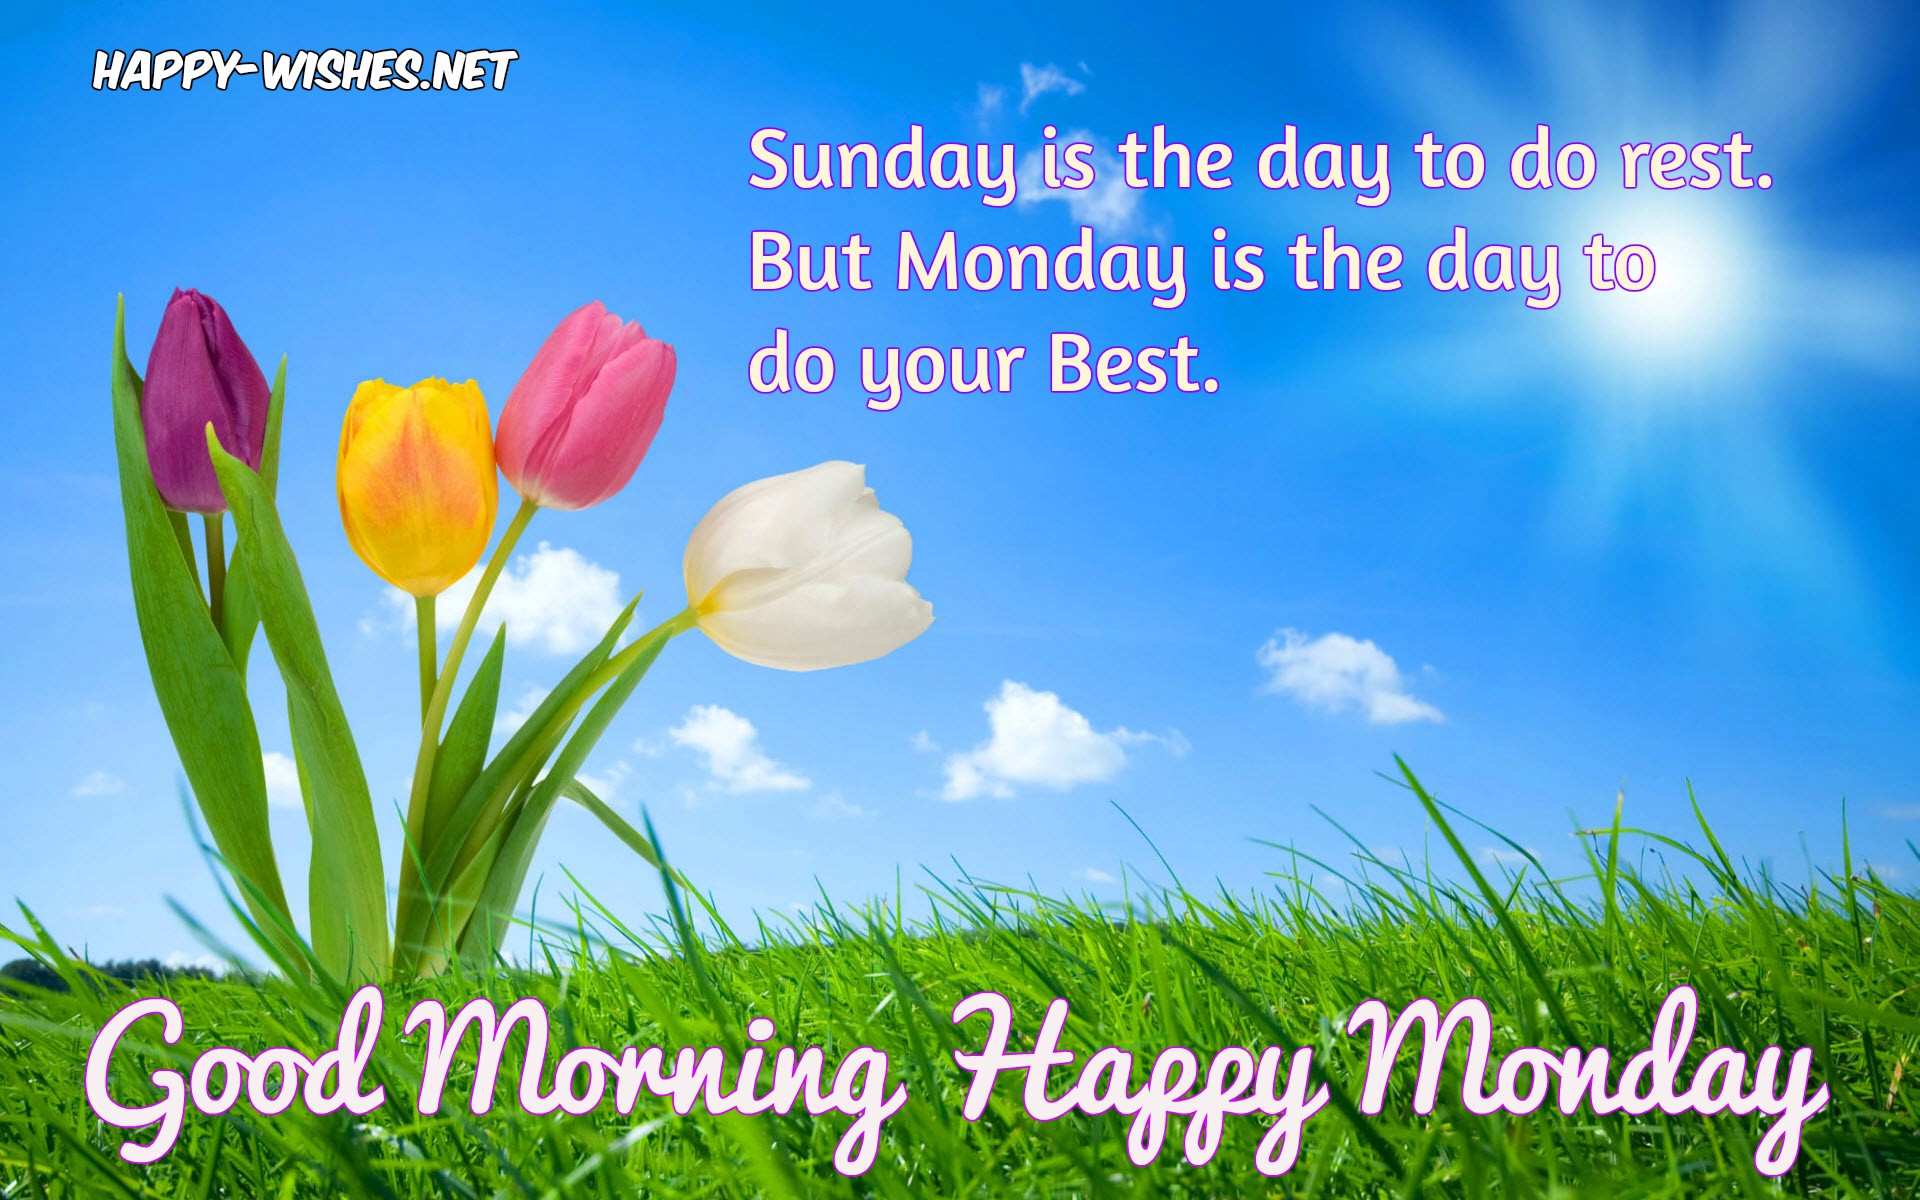 Good Morning wishes on Monday - Quotes